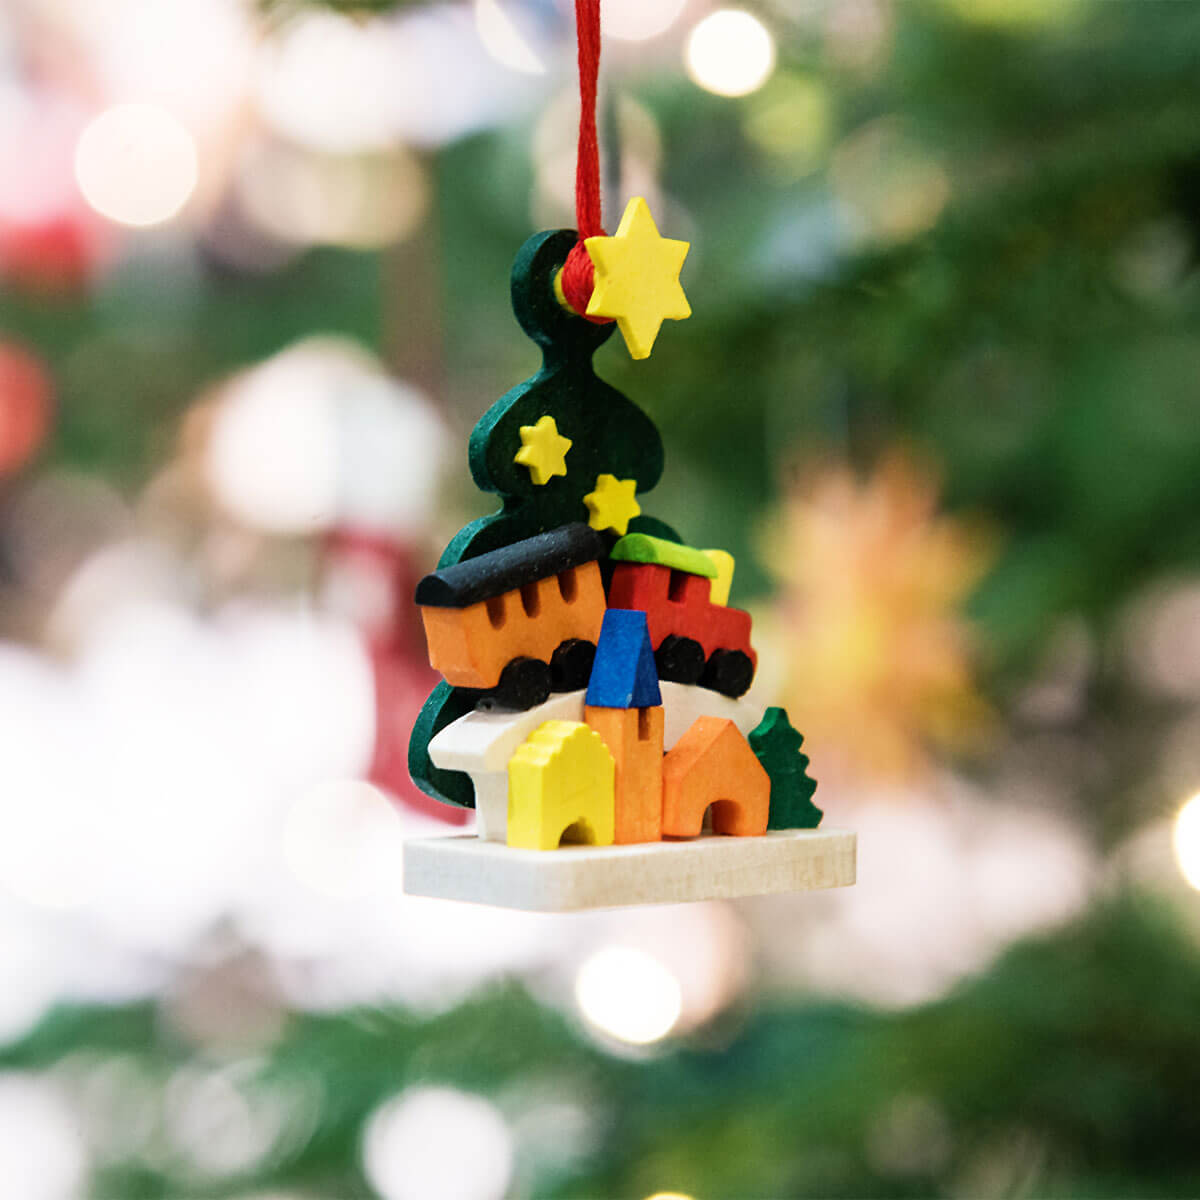 Christmas Tree & Gifts Ornament with toy box